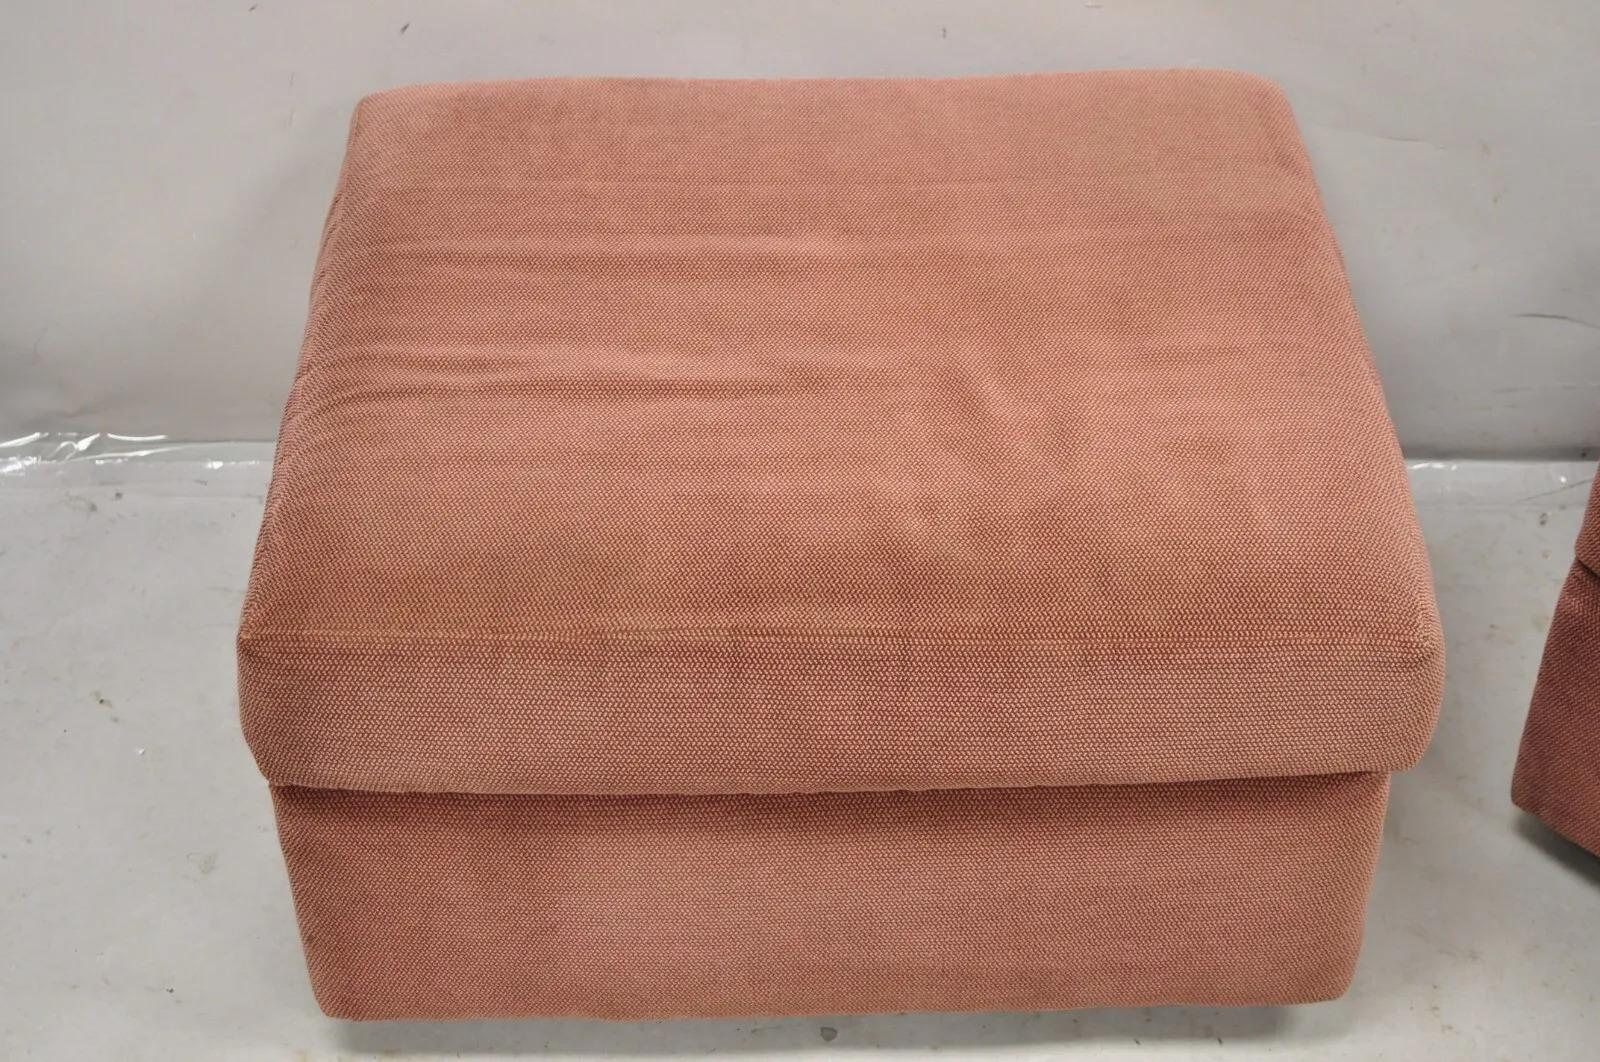 Thayer Coggin Modern Upholstered Mauve Color Ottomans on Wheels - a Pair 1